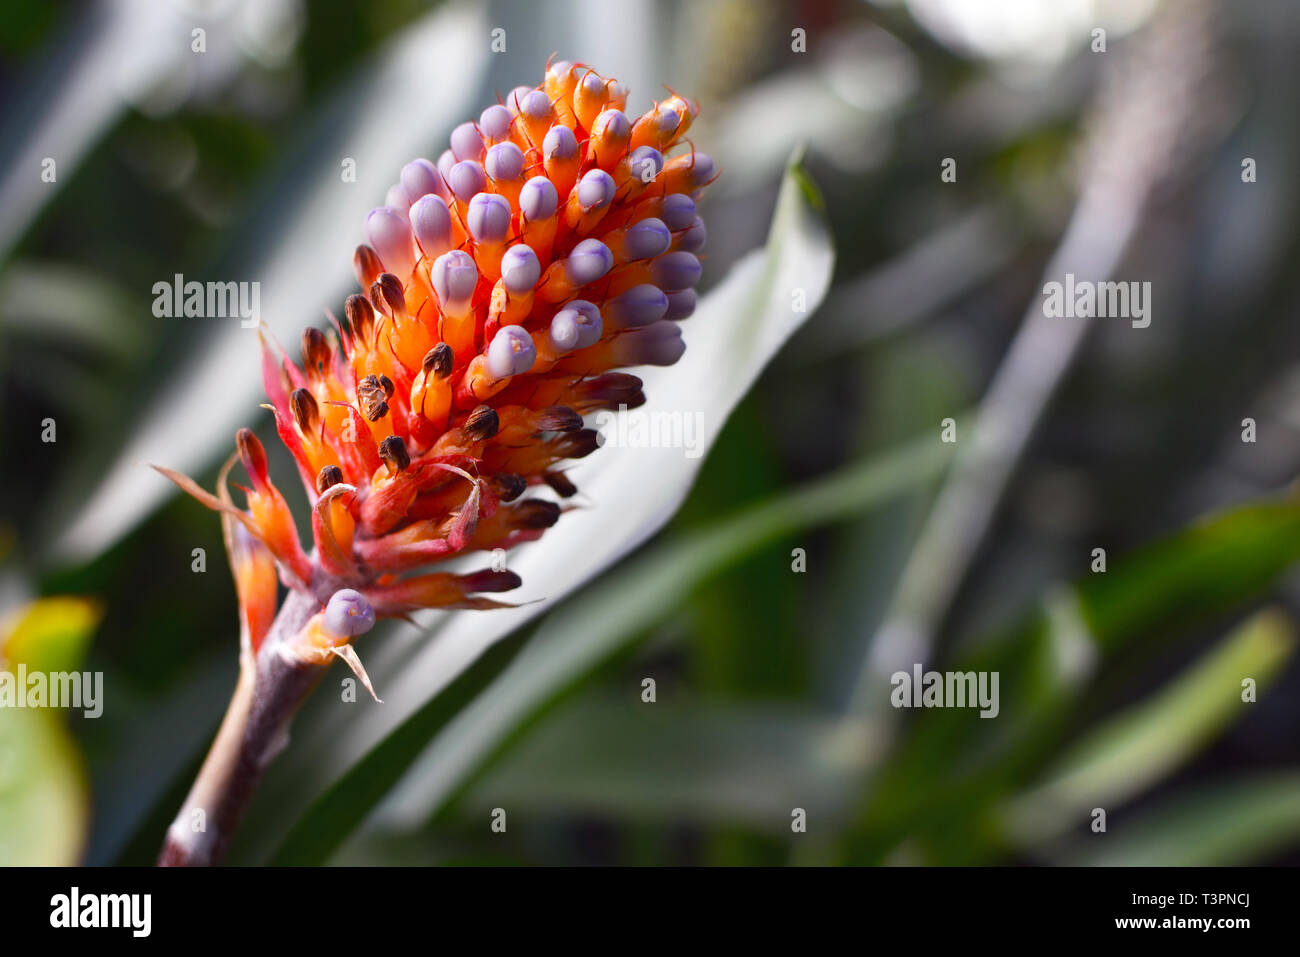 Close up of a bright orange with violet tips exotic Aechmea Cylindrata Bromeliad flower in full bloom Stock Photo